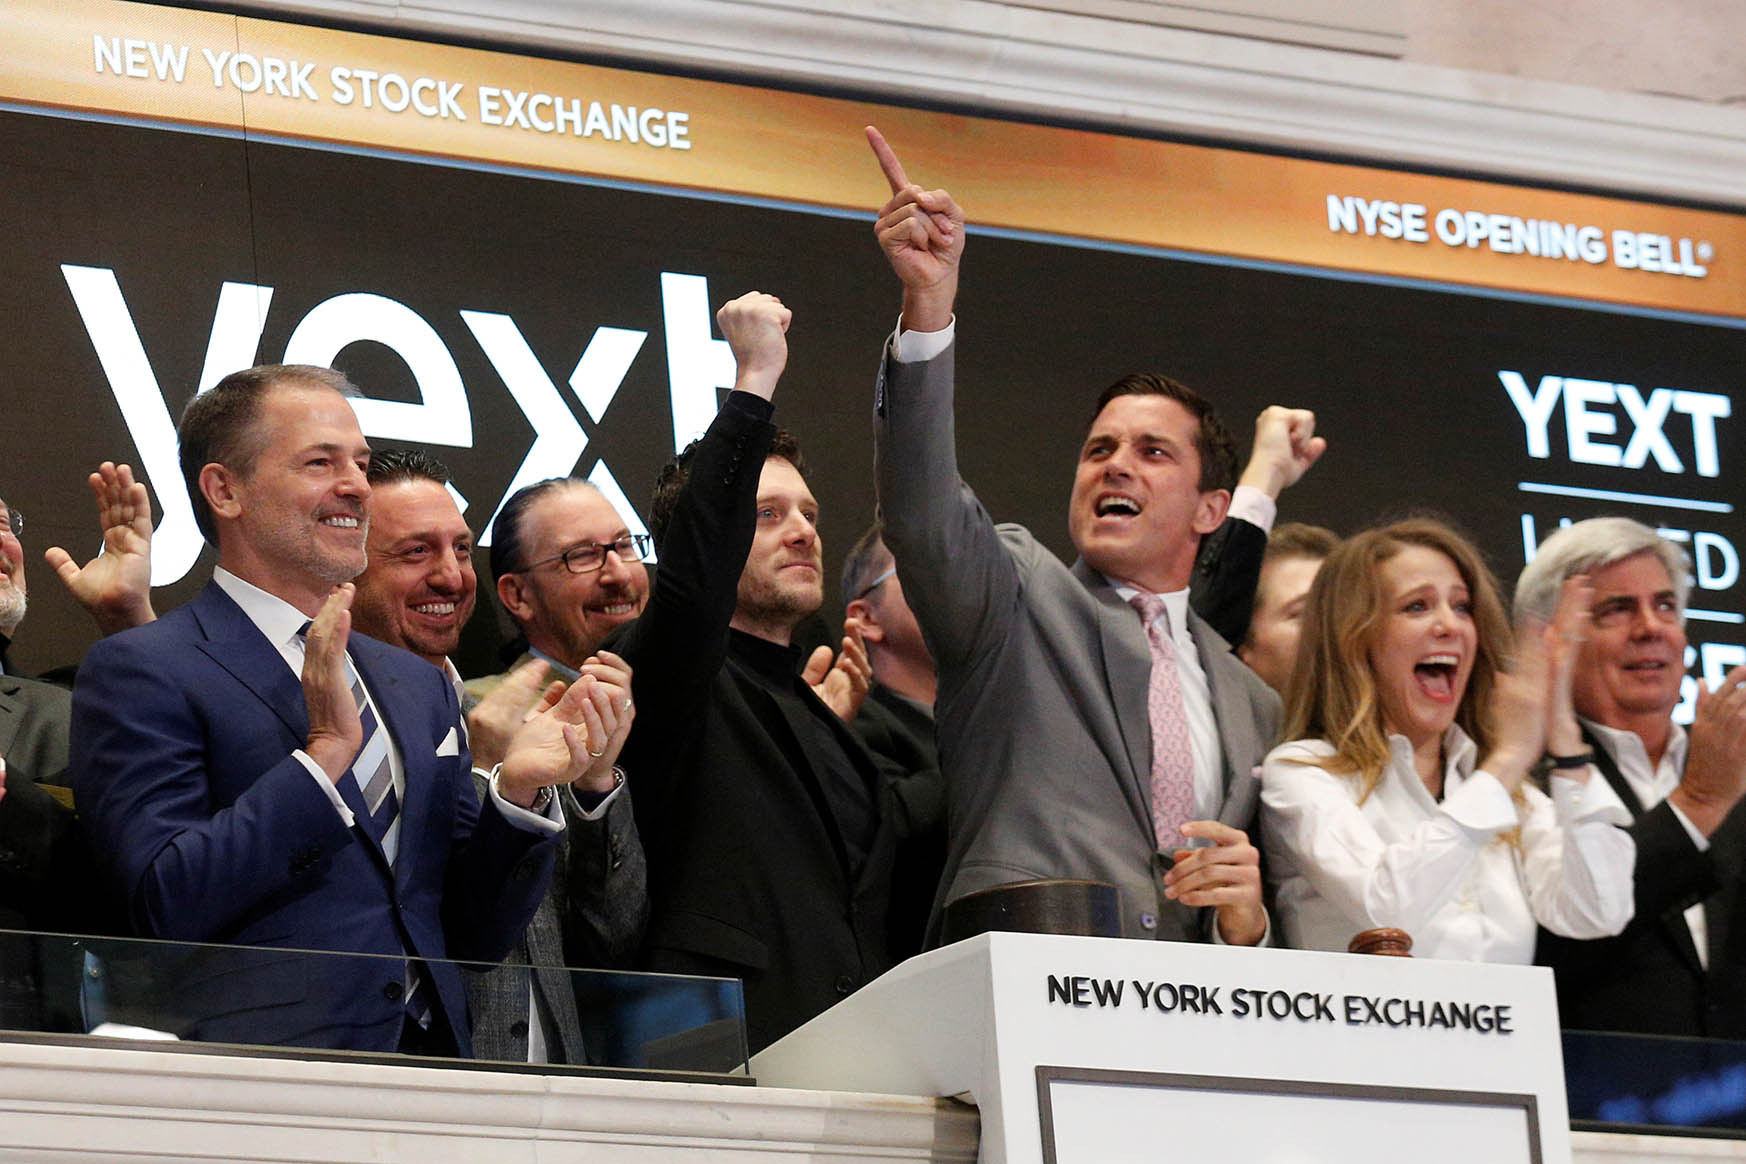 Yext sees 39% revenue growth in latest quarter